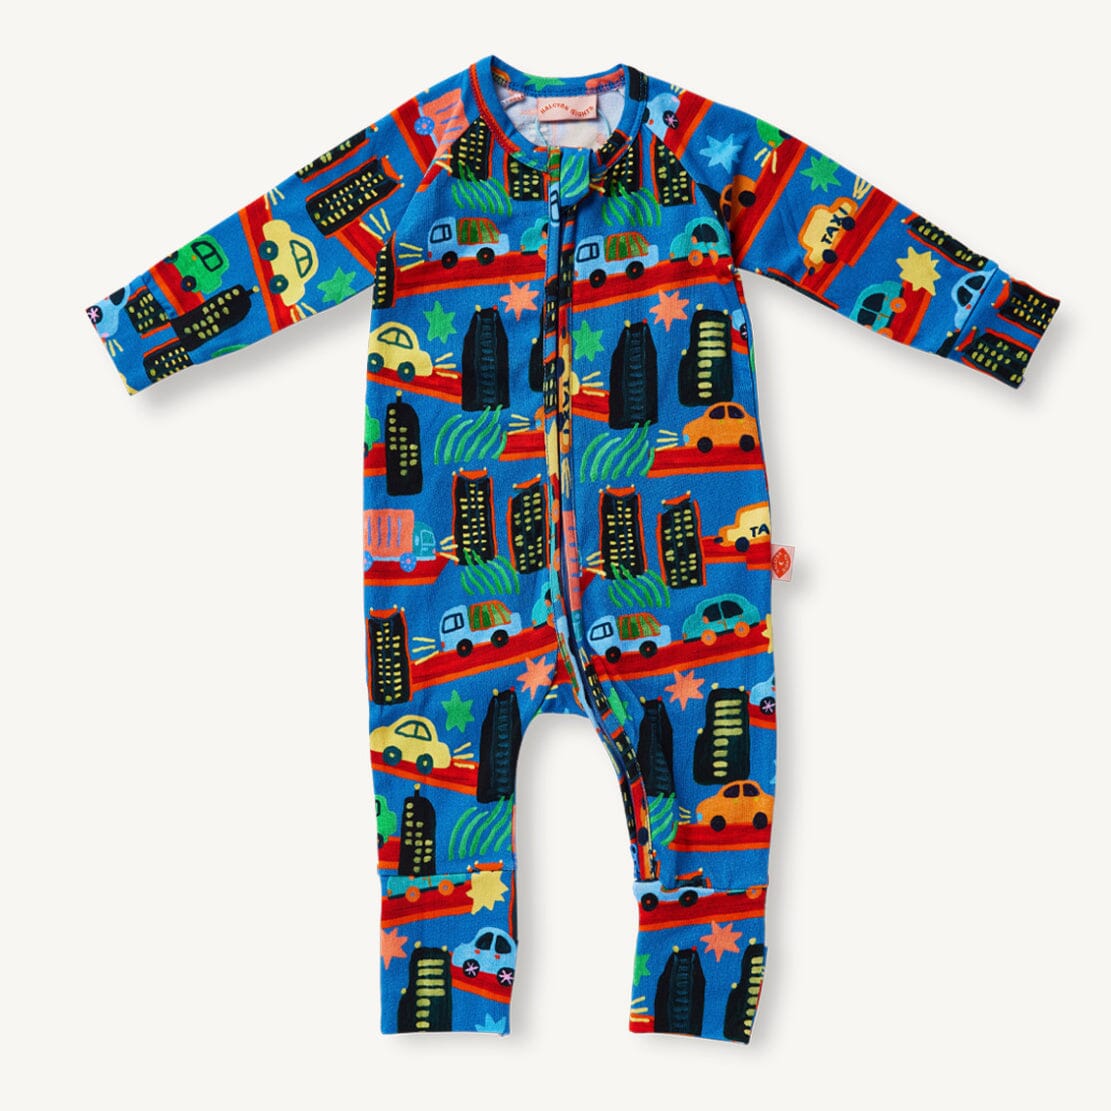 Australia-wide baby gift delivery | Buy Halcyon Nights Online | Same Day New Baby Gift Delivery | Seoul City Long Sleeve Zip Suit